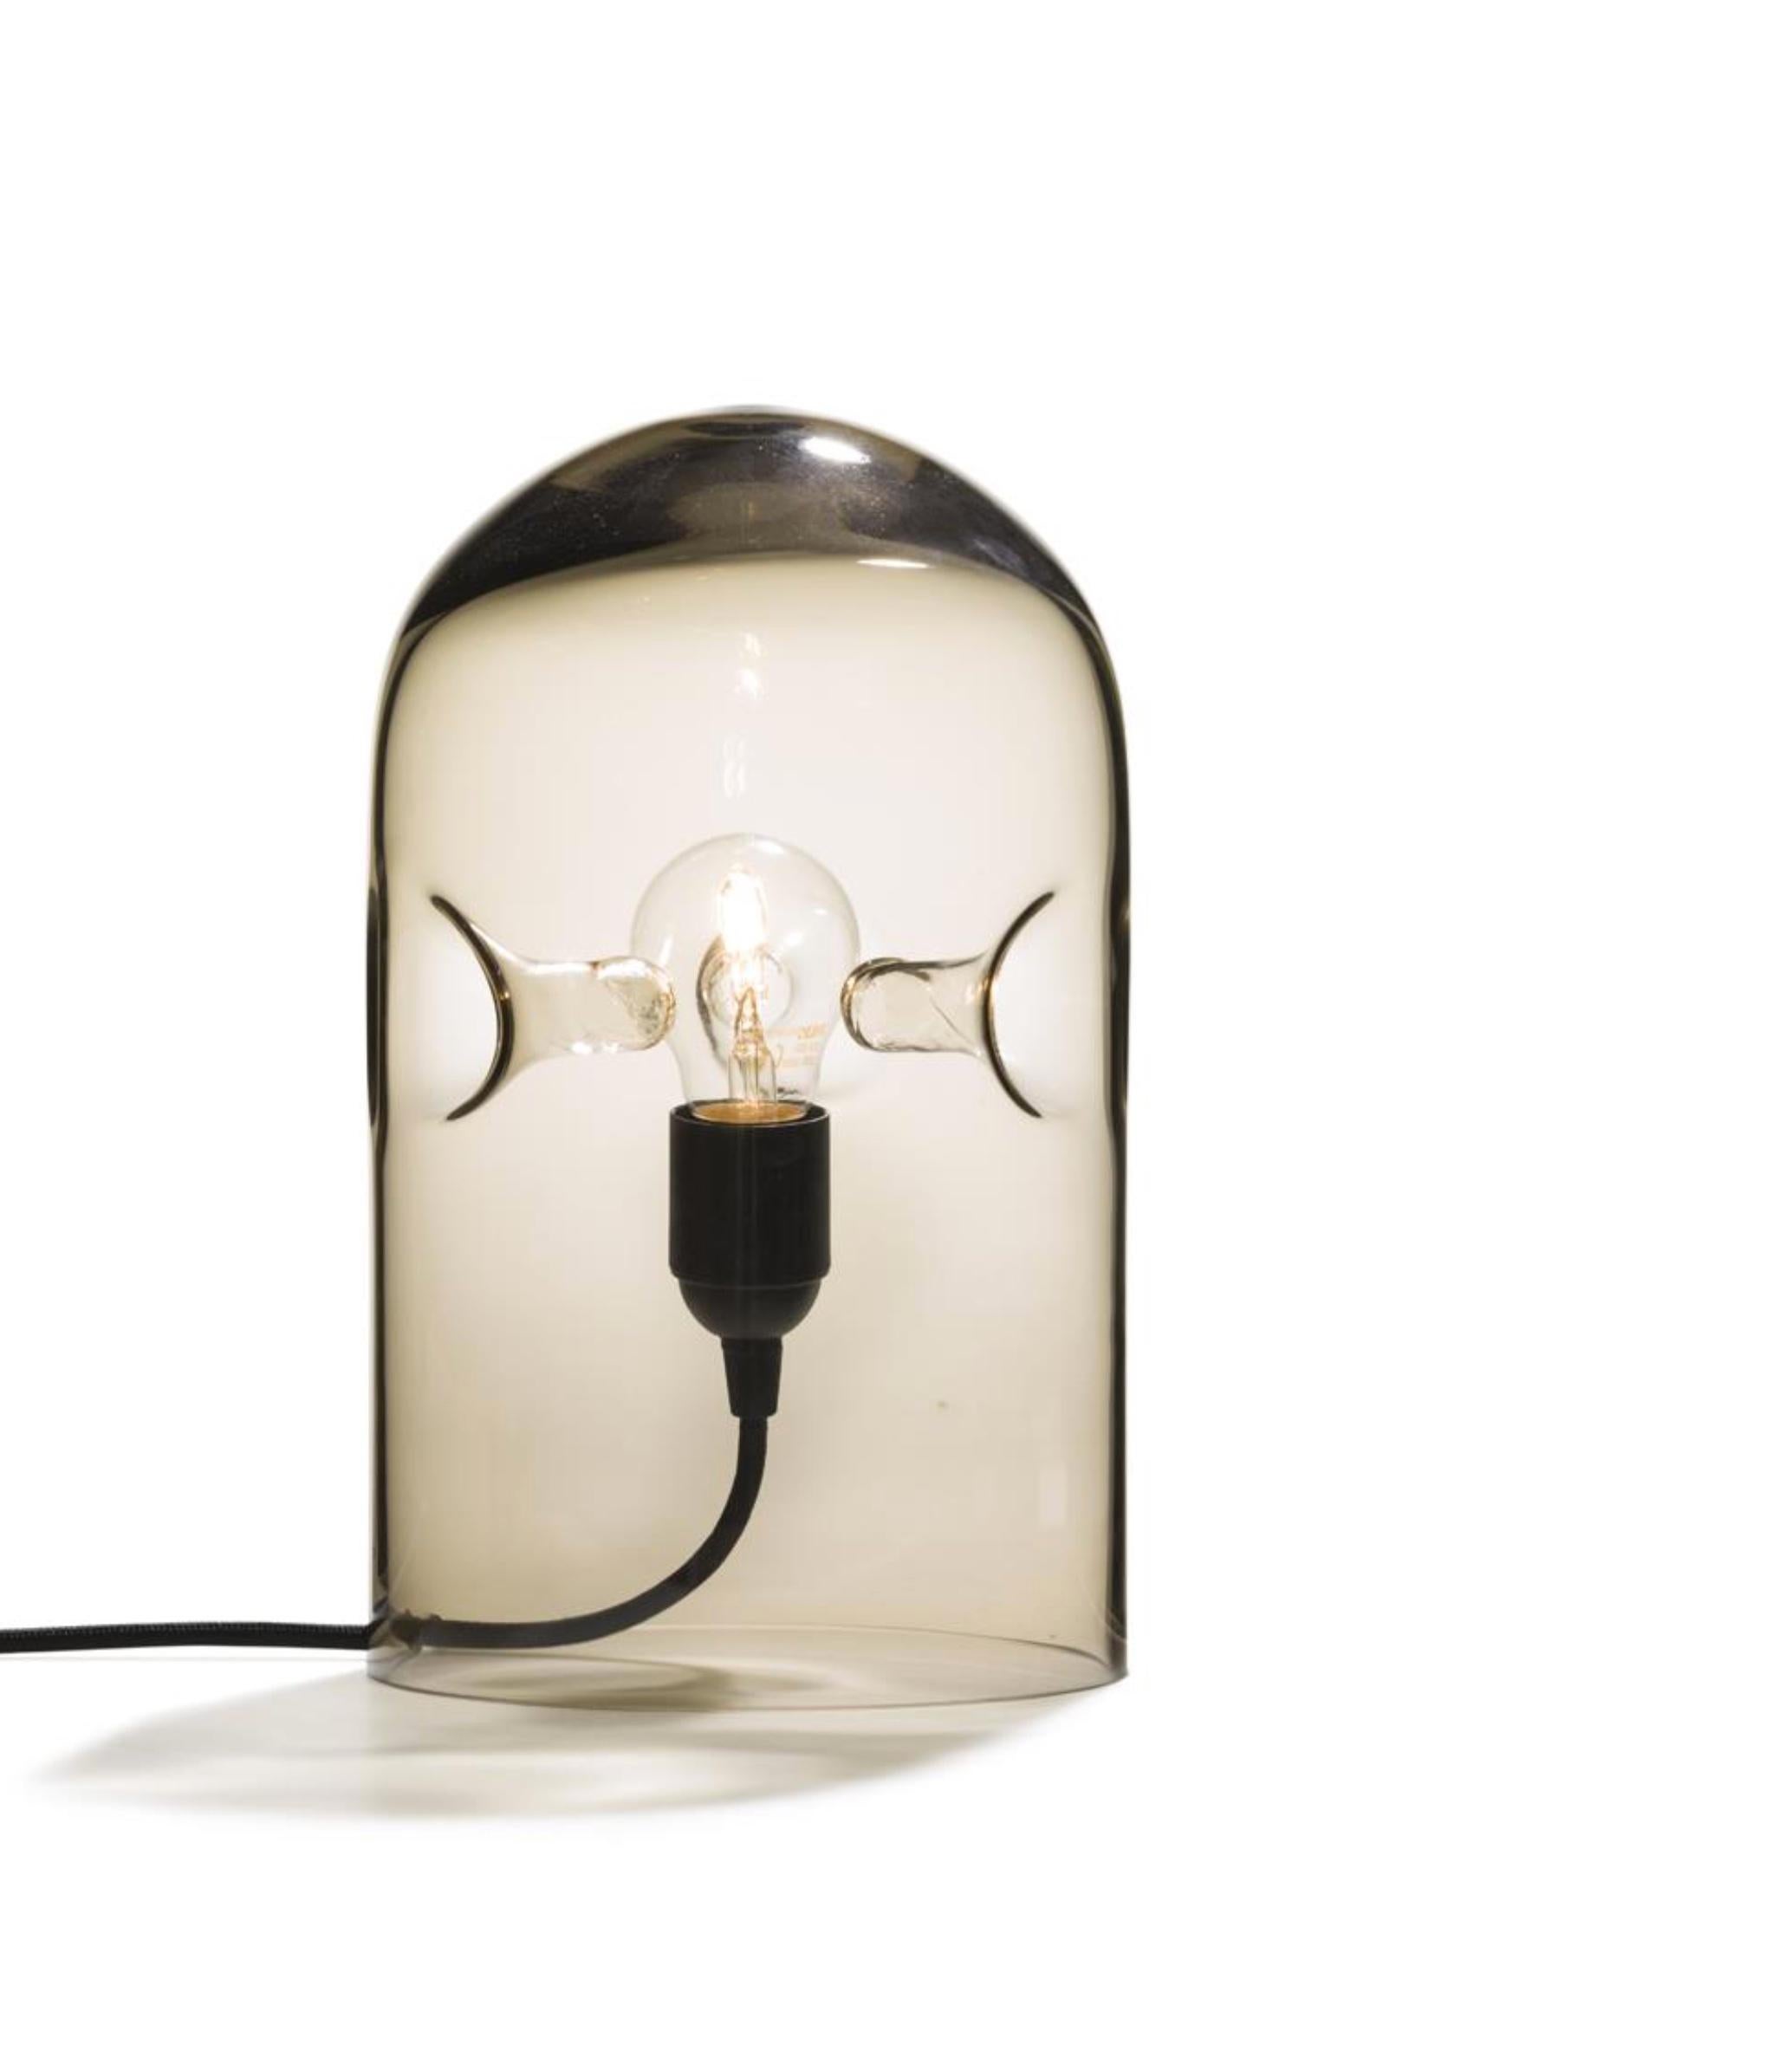 The 'Tripod' lamp by Gijs Bakker, designed in 1978, is a sensual table lamp made of one piece of moth-blown glass. Three intriguing structures support the bulb in the centre of the lamp. All Tripods are mouth-blown and therefore unique.